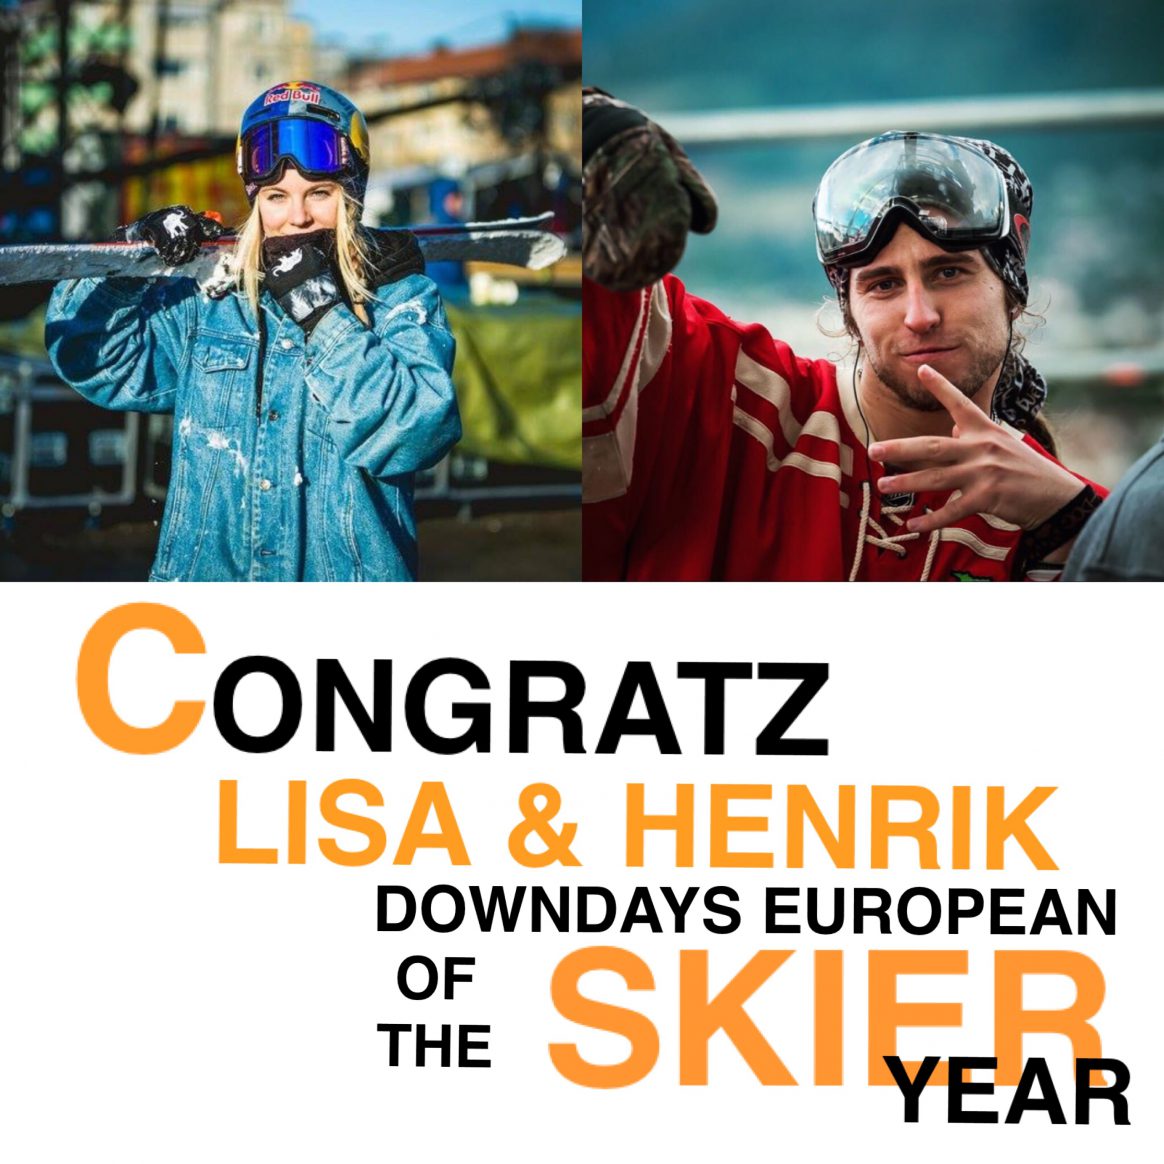 Henrik Harlaut and Lisa Zimmermann are your European Skiers of the Year